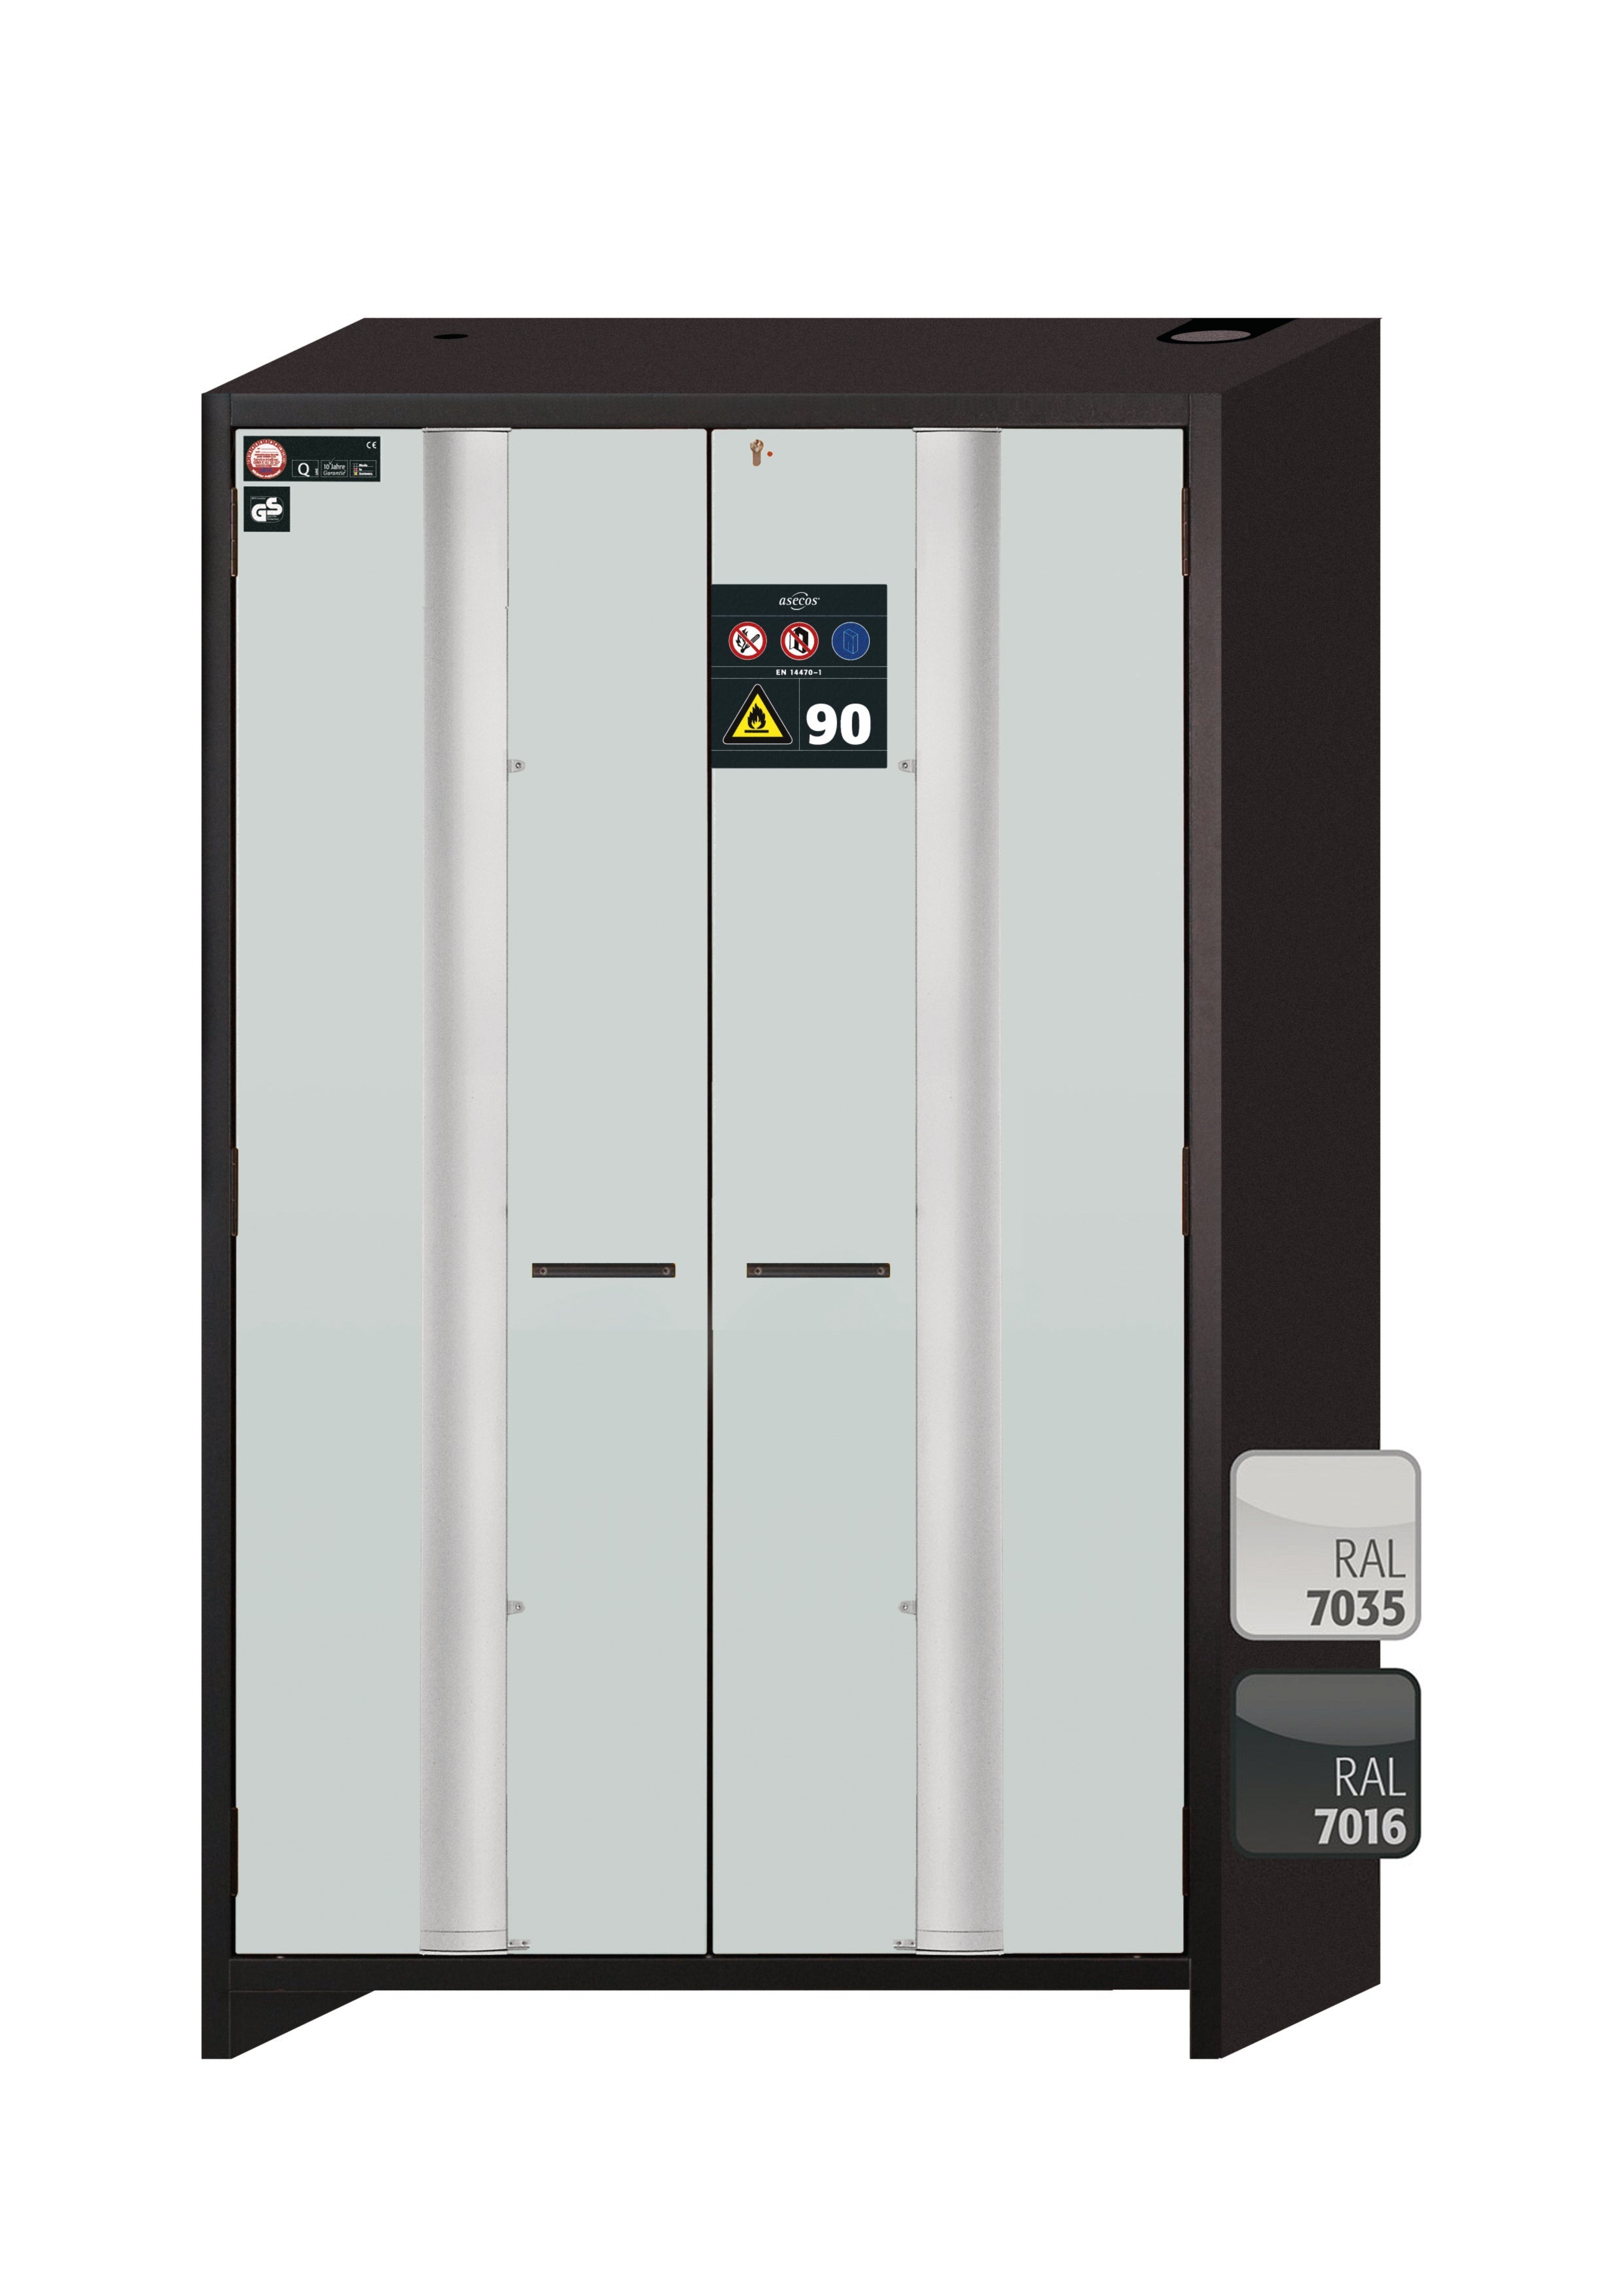 Type 90 safety cabinet Q-PHOENIX-90 model Q90.195.120.FD in light gray RAL 7035 with 2x standard tray base (sheet steel)